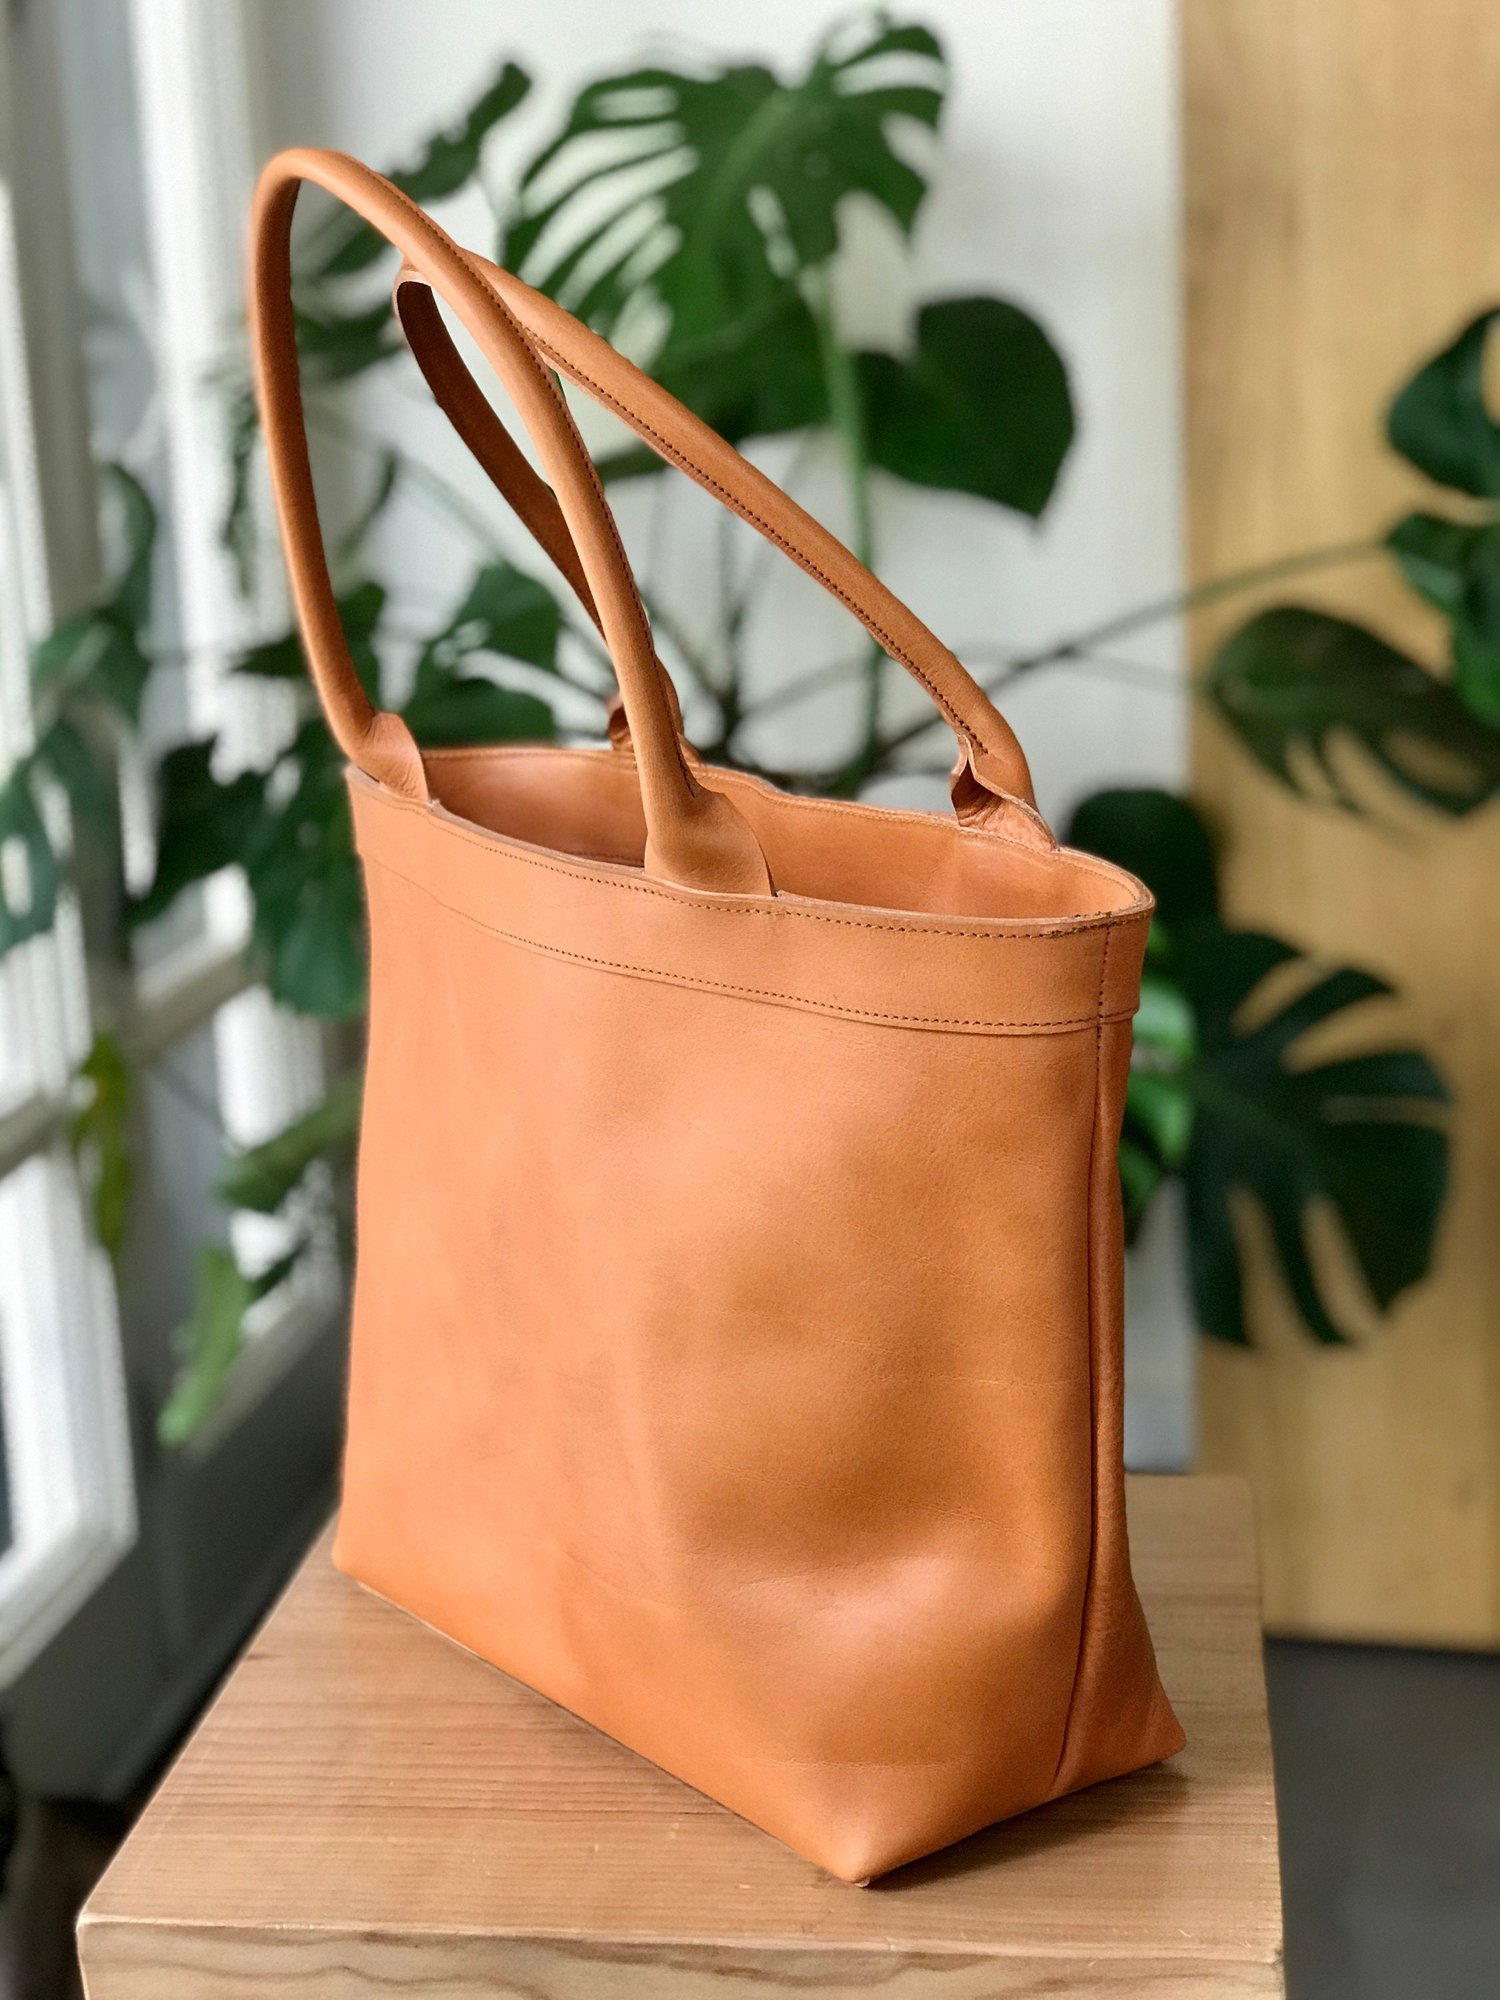 Leather tote bag with zipper and inside lining. Shoulder bag. Camel color  leather. Handmade. — Vermut Atelier